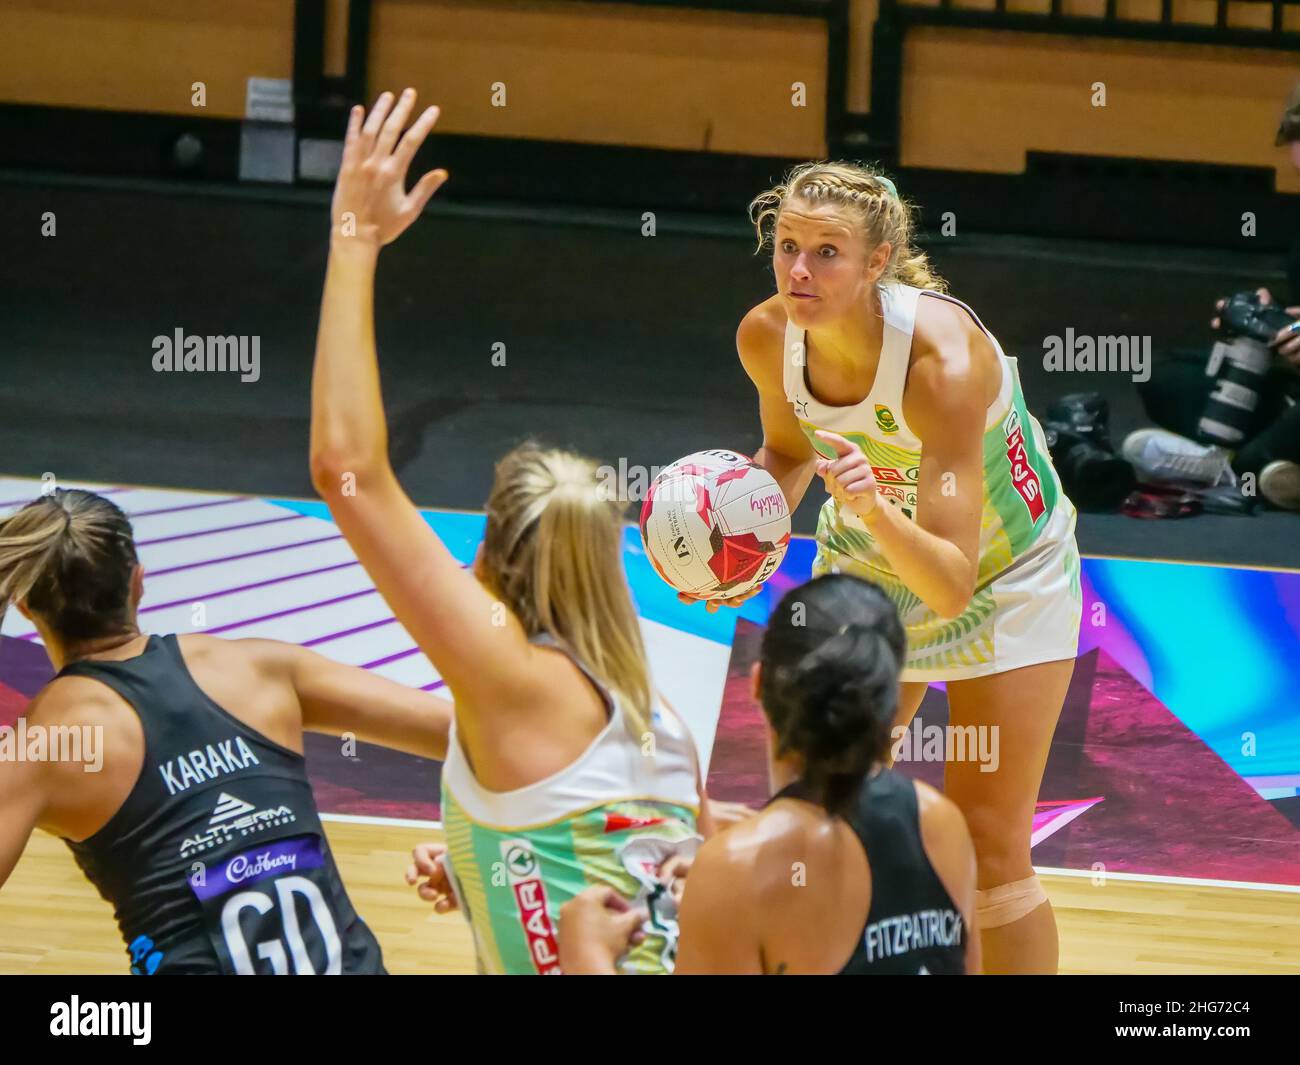 London, UK. 18th Jan, 2022. Copper Box Arena, London, 18th January 2022 Izette Griesel (WA - South Africa Proteas) organises her team in the match between Proteas (South Africa) and Silver Ferns (New Zealand) in the Quad Series at the Copper Box Arena, London on 18th January 2022 Claire Jeffrey/SPP Credit: SPP Sport Press Photo. /Alamy Live News Stock Photo